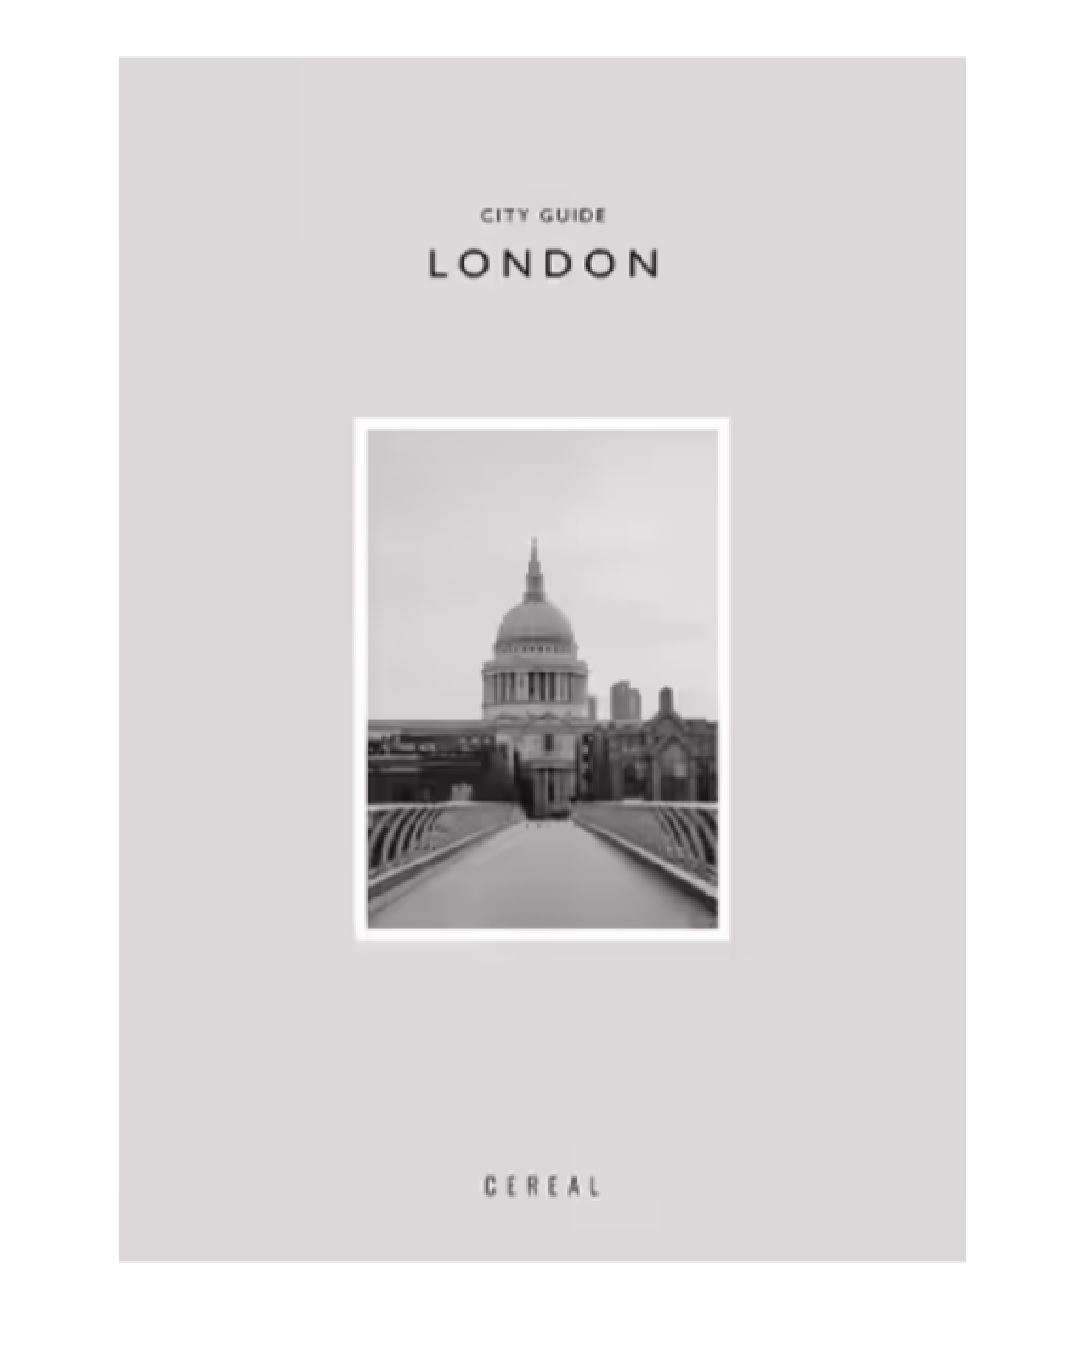 Cereal city guide London